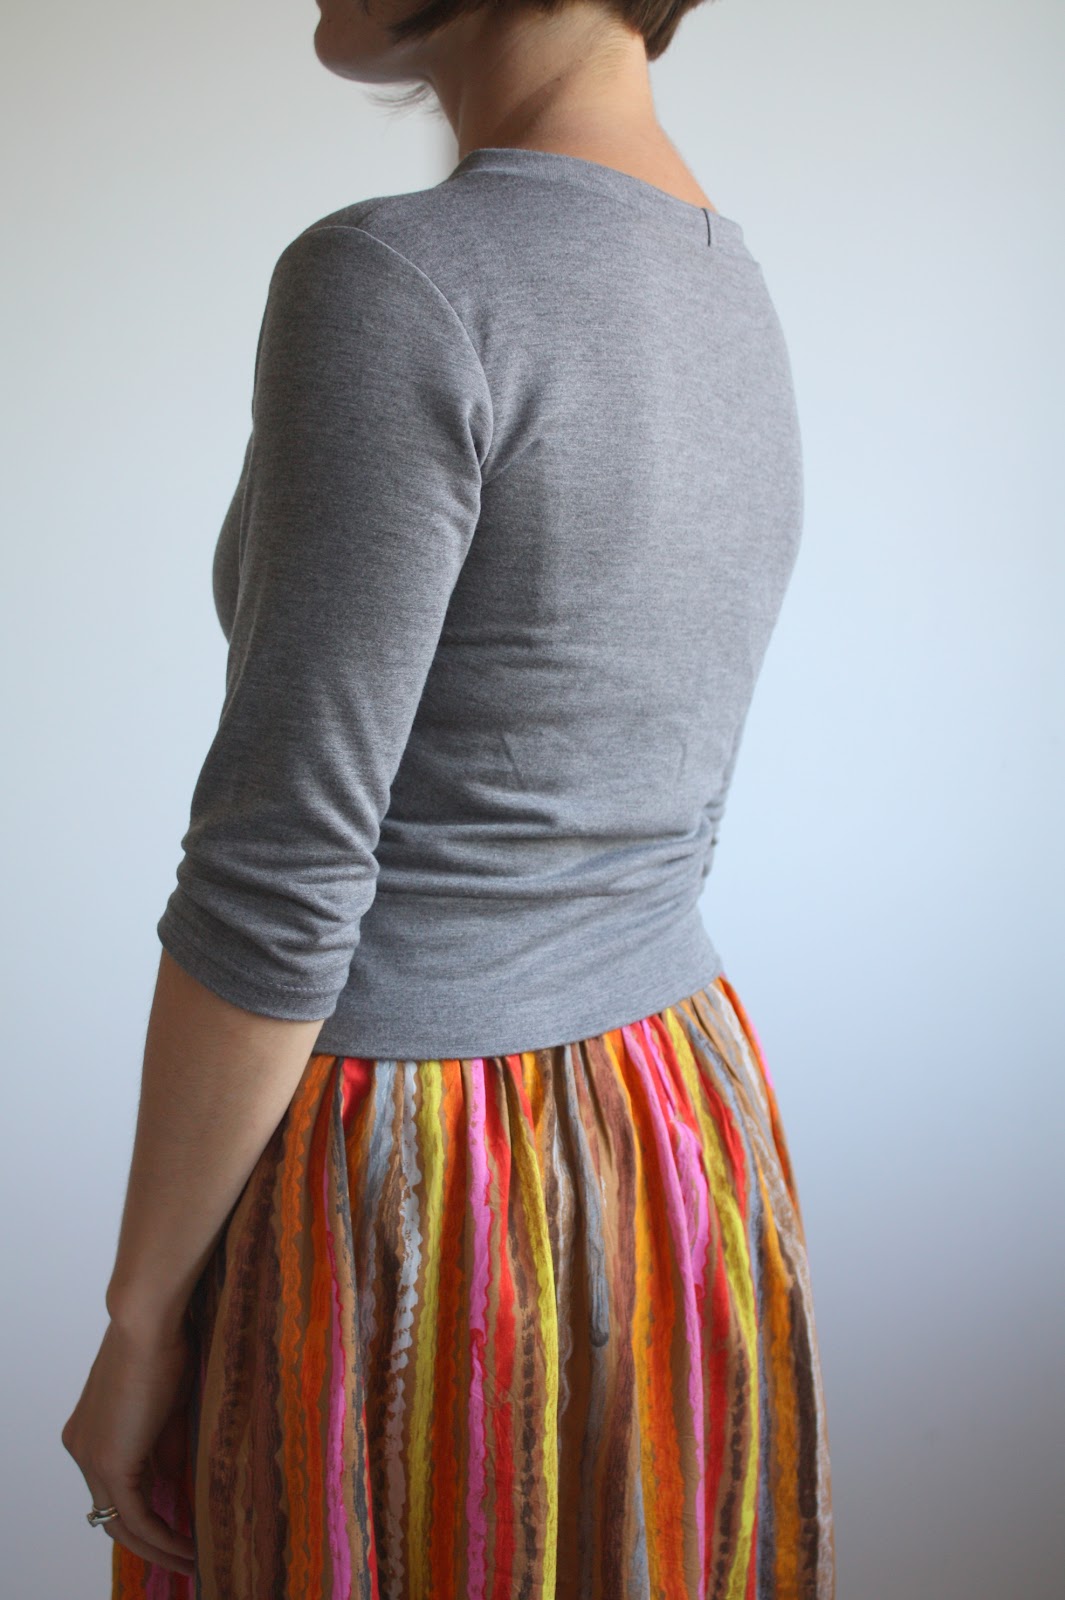 Nicole at Home: Astoria sweater + swishy skirt = new fave outfit